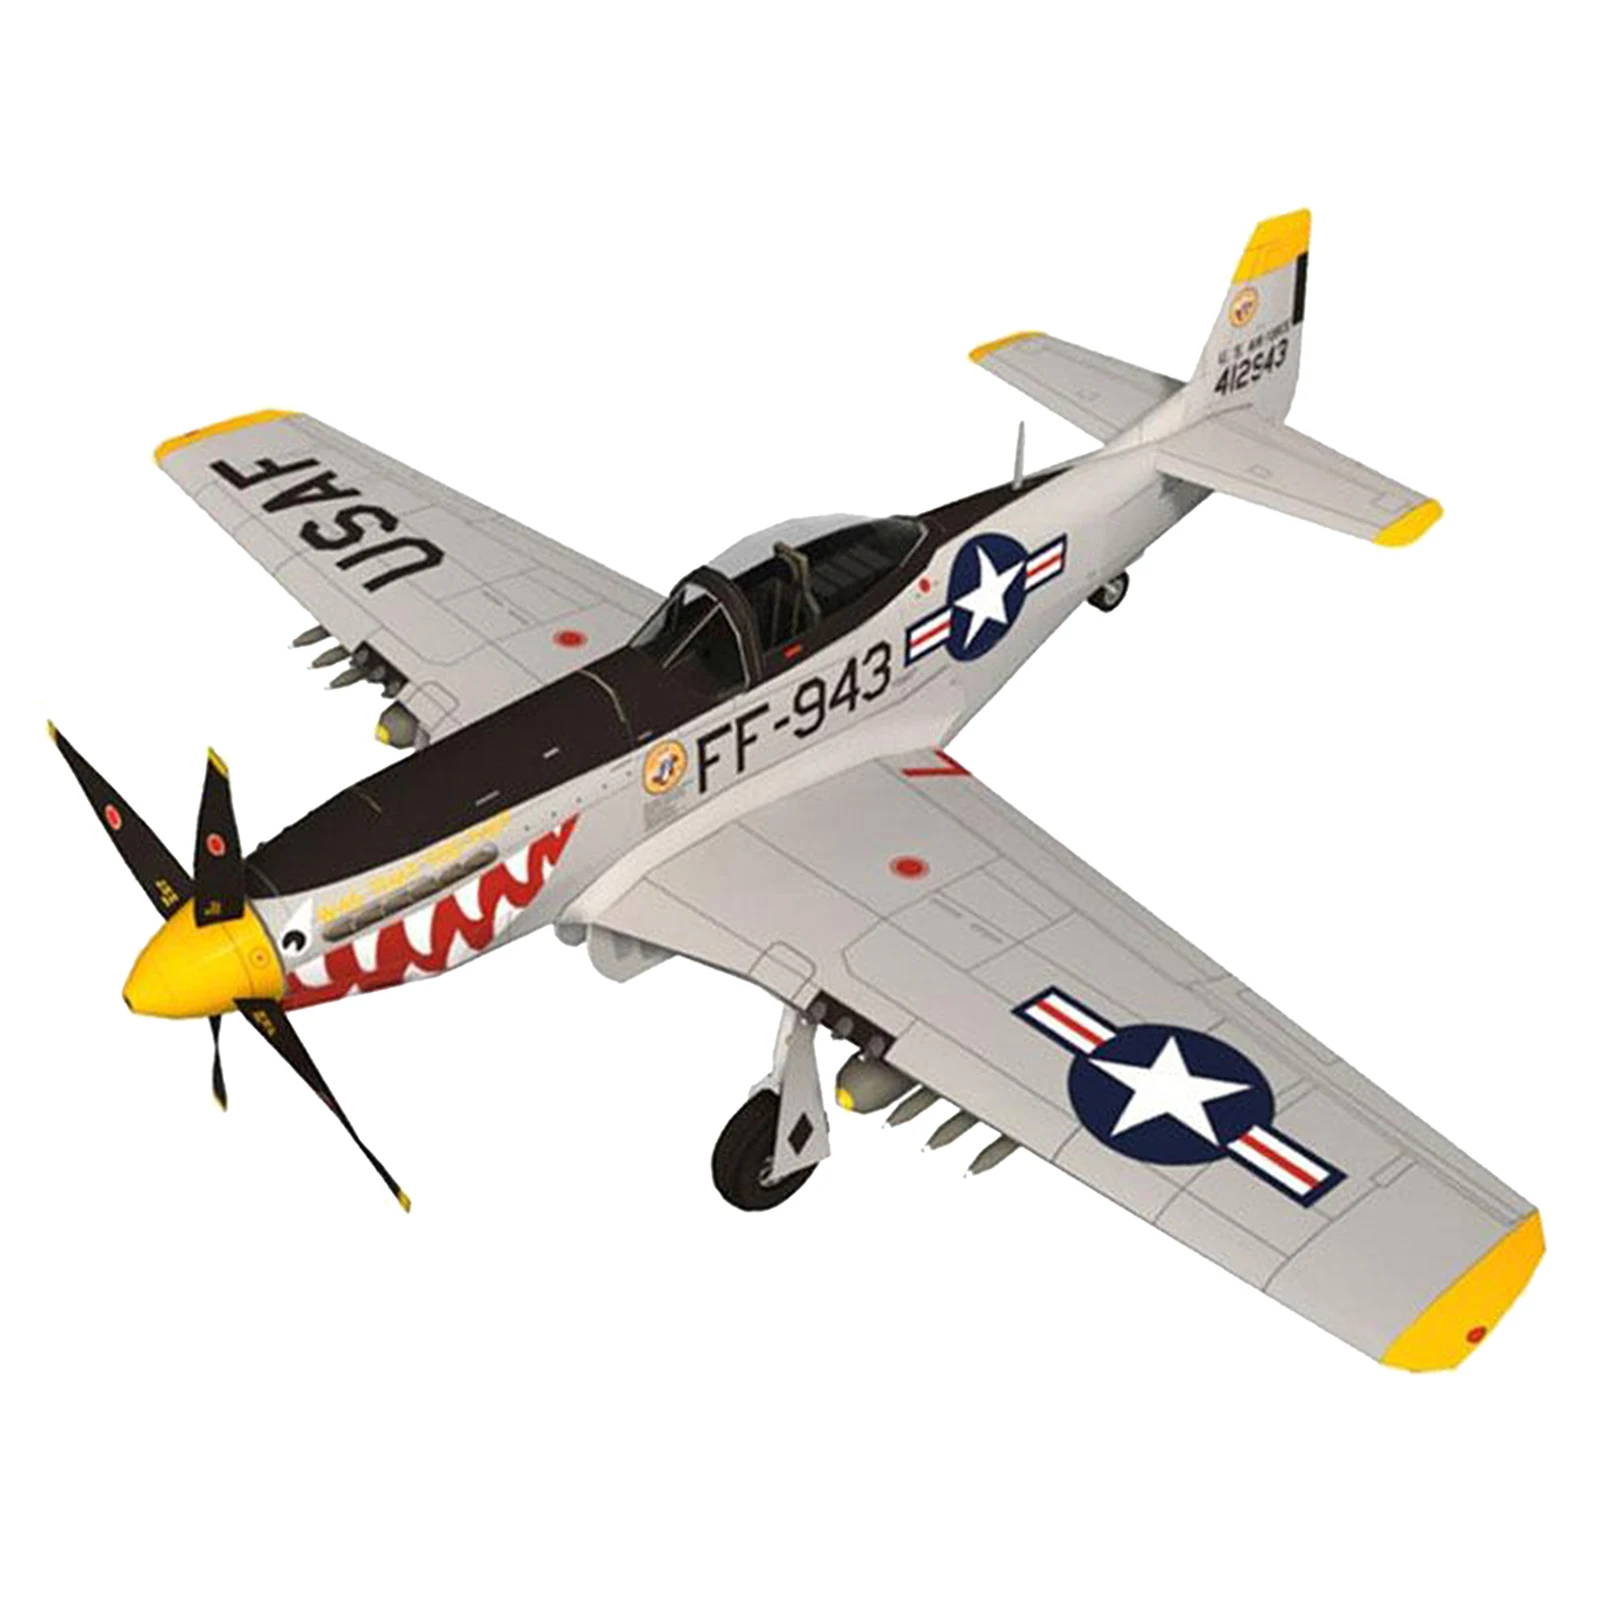 1:33 P-51D Fighter Assemble Model Airplane Aircraft Model for Home Office Decoration